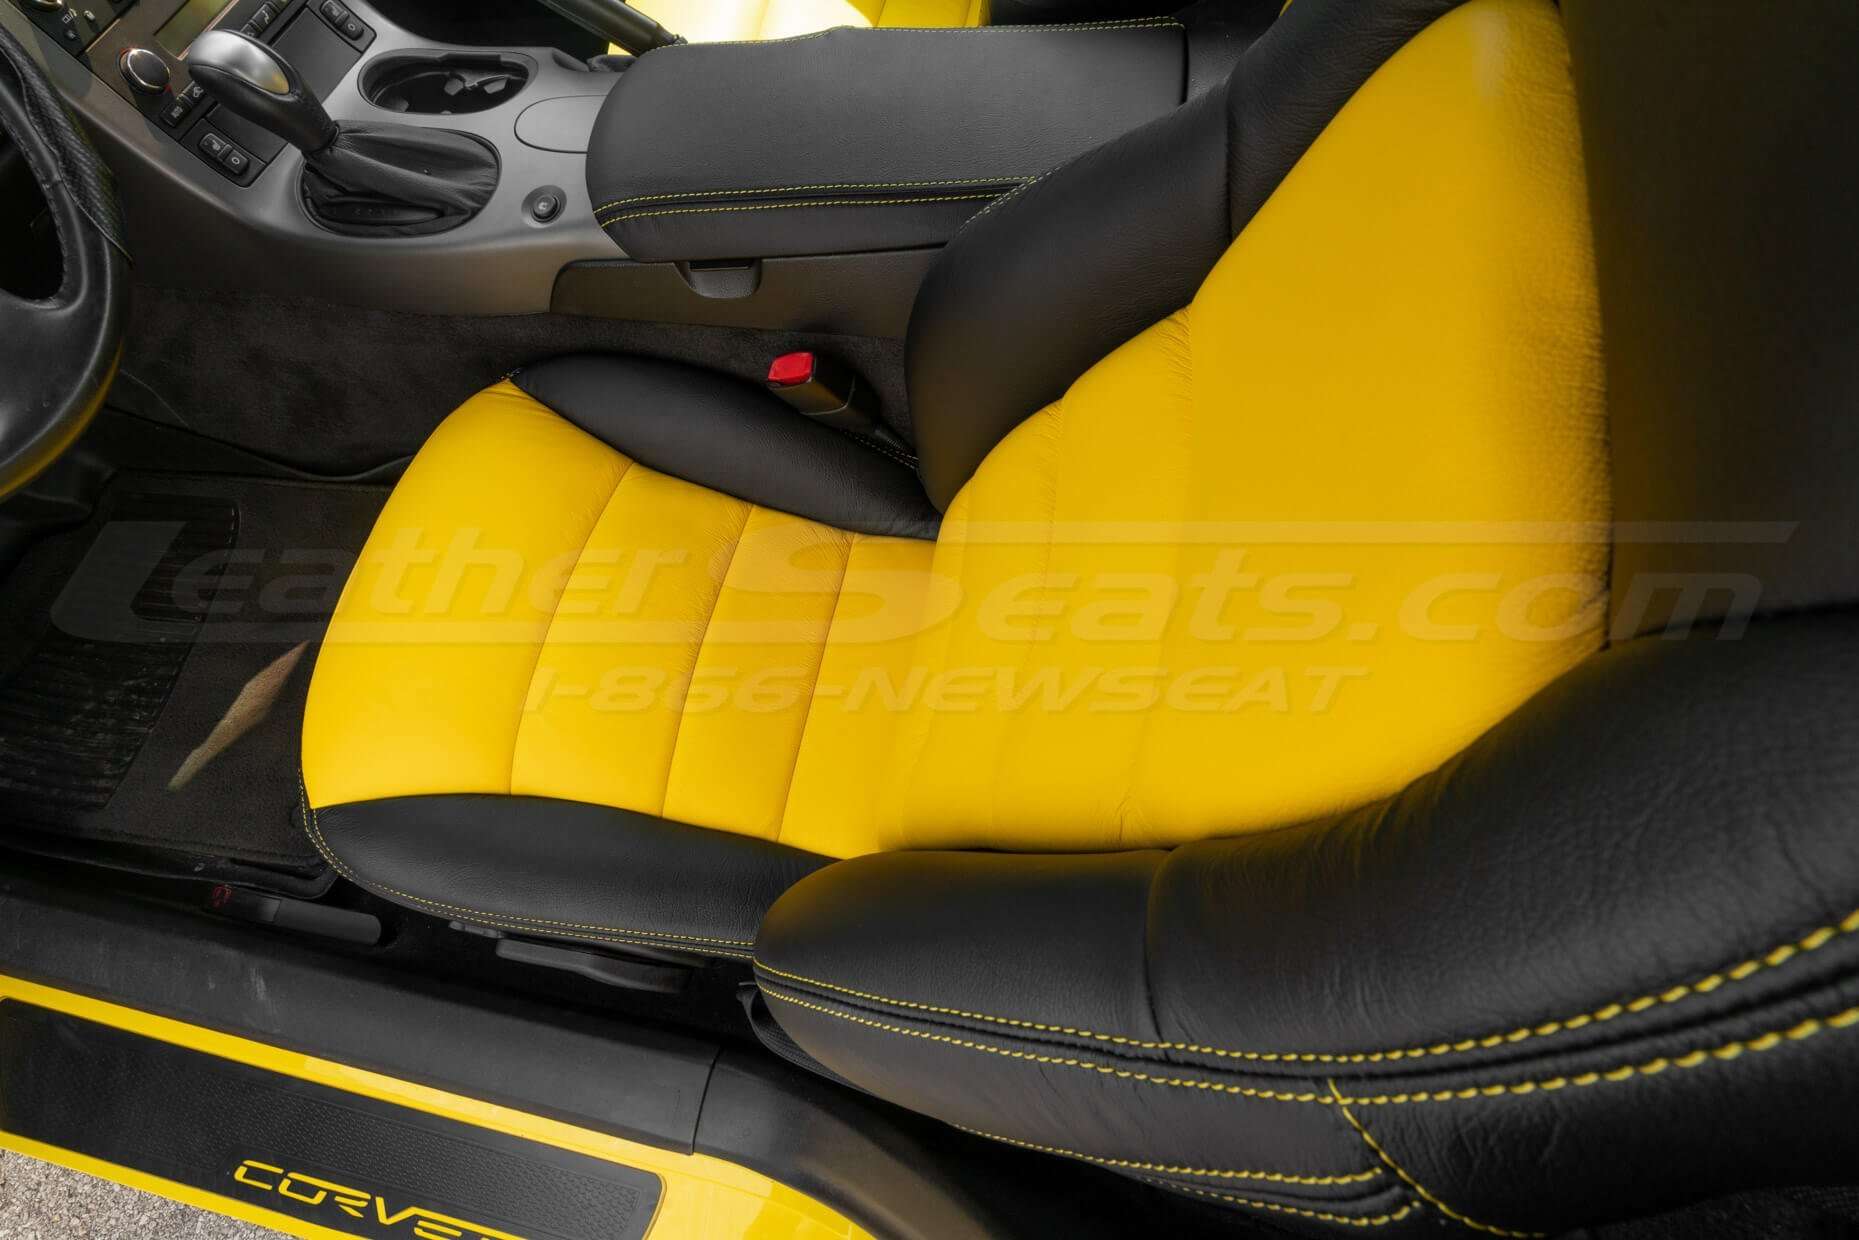 Top down view of Velocity Yellow Body - installed leather seat